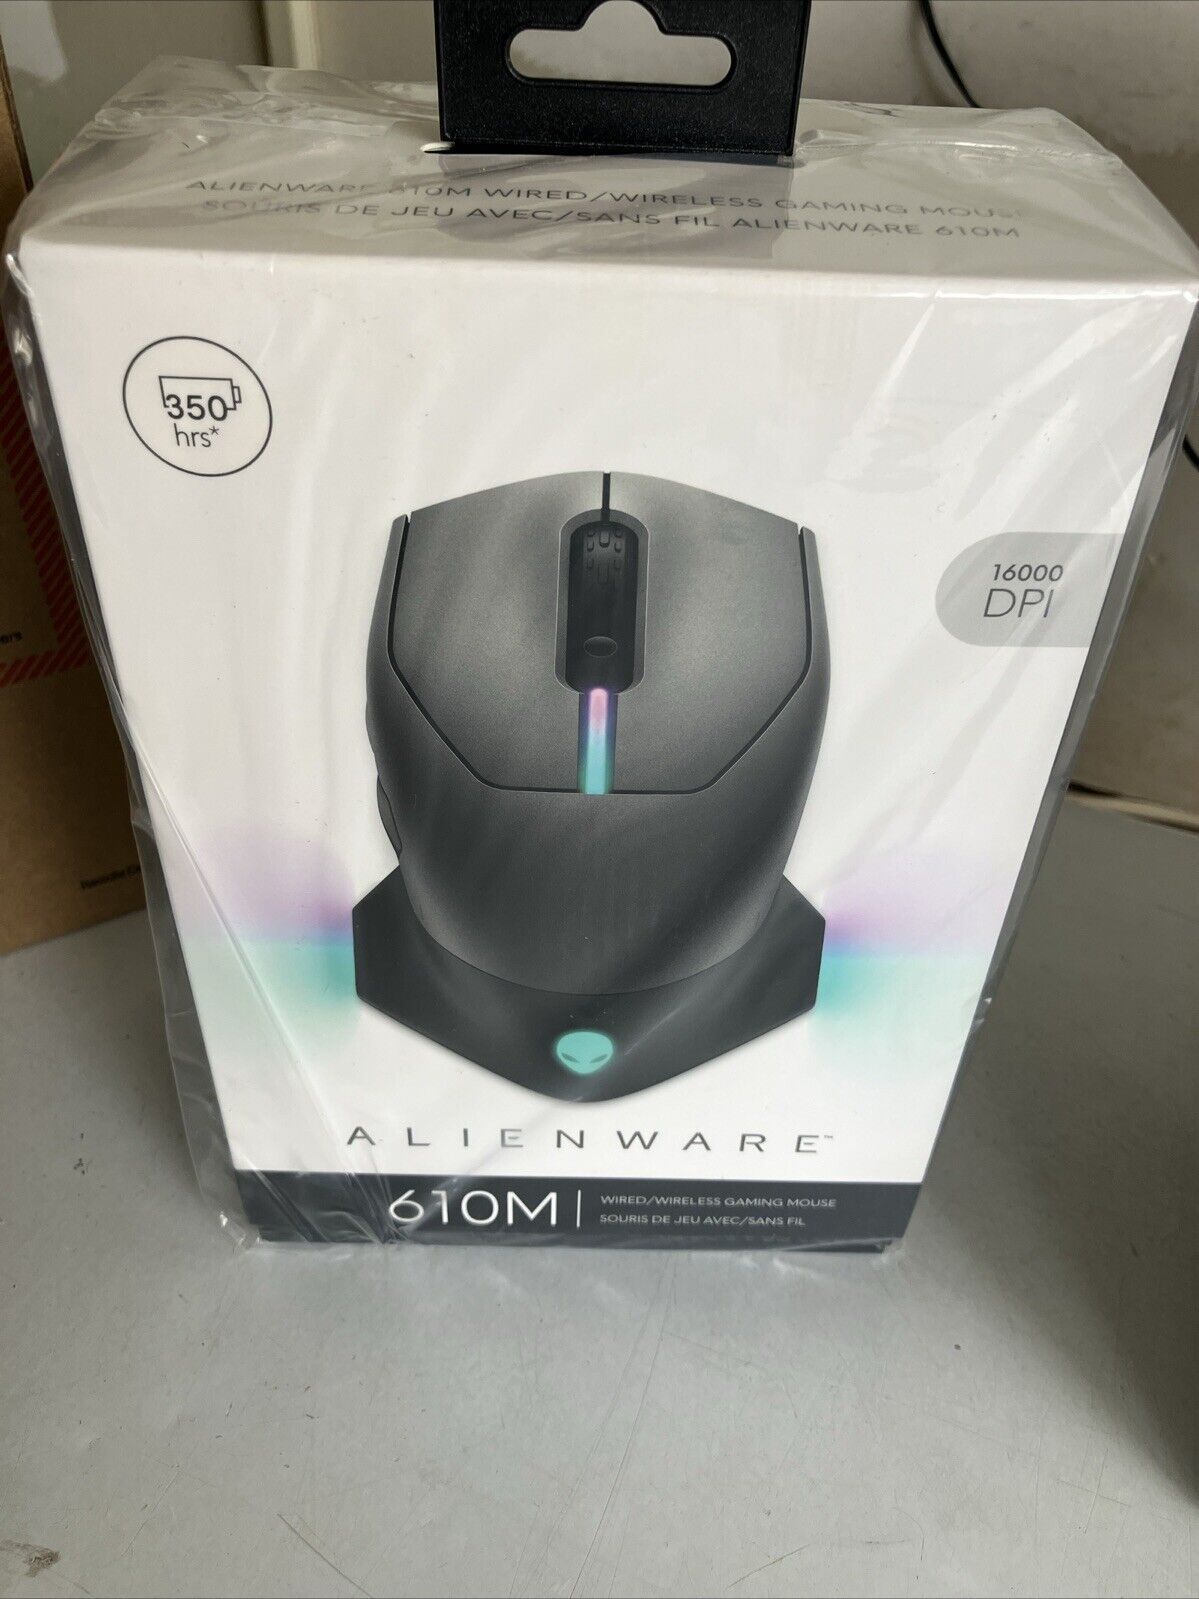 Alienware Wired/Wireless Gaming Mouse AW610M: 16000 DPI Optical Sensor NEW $70